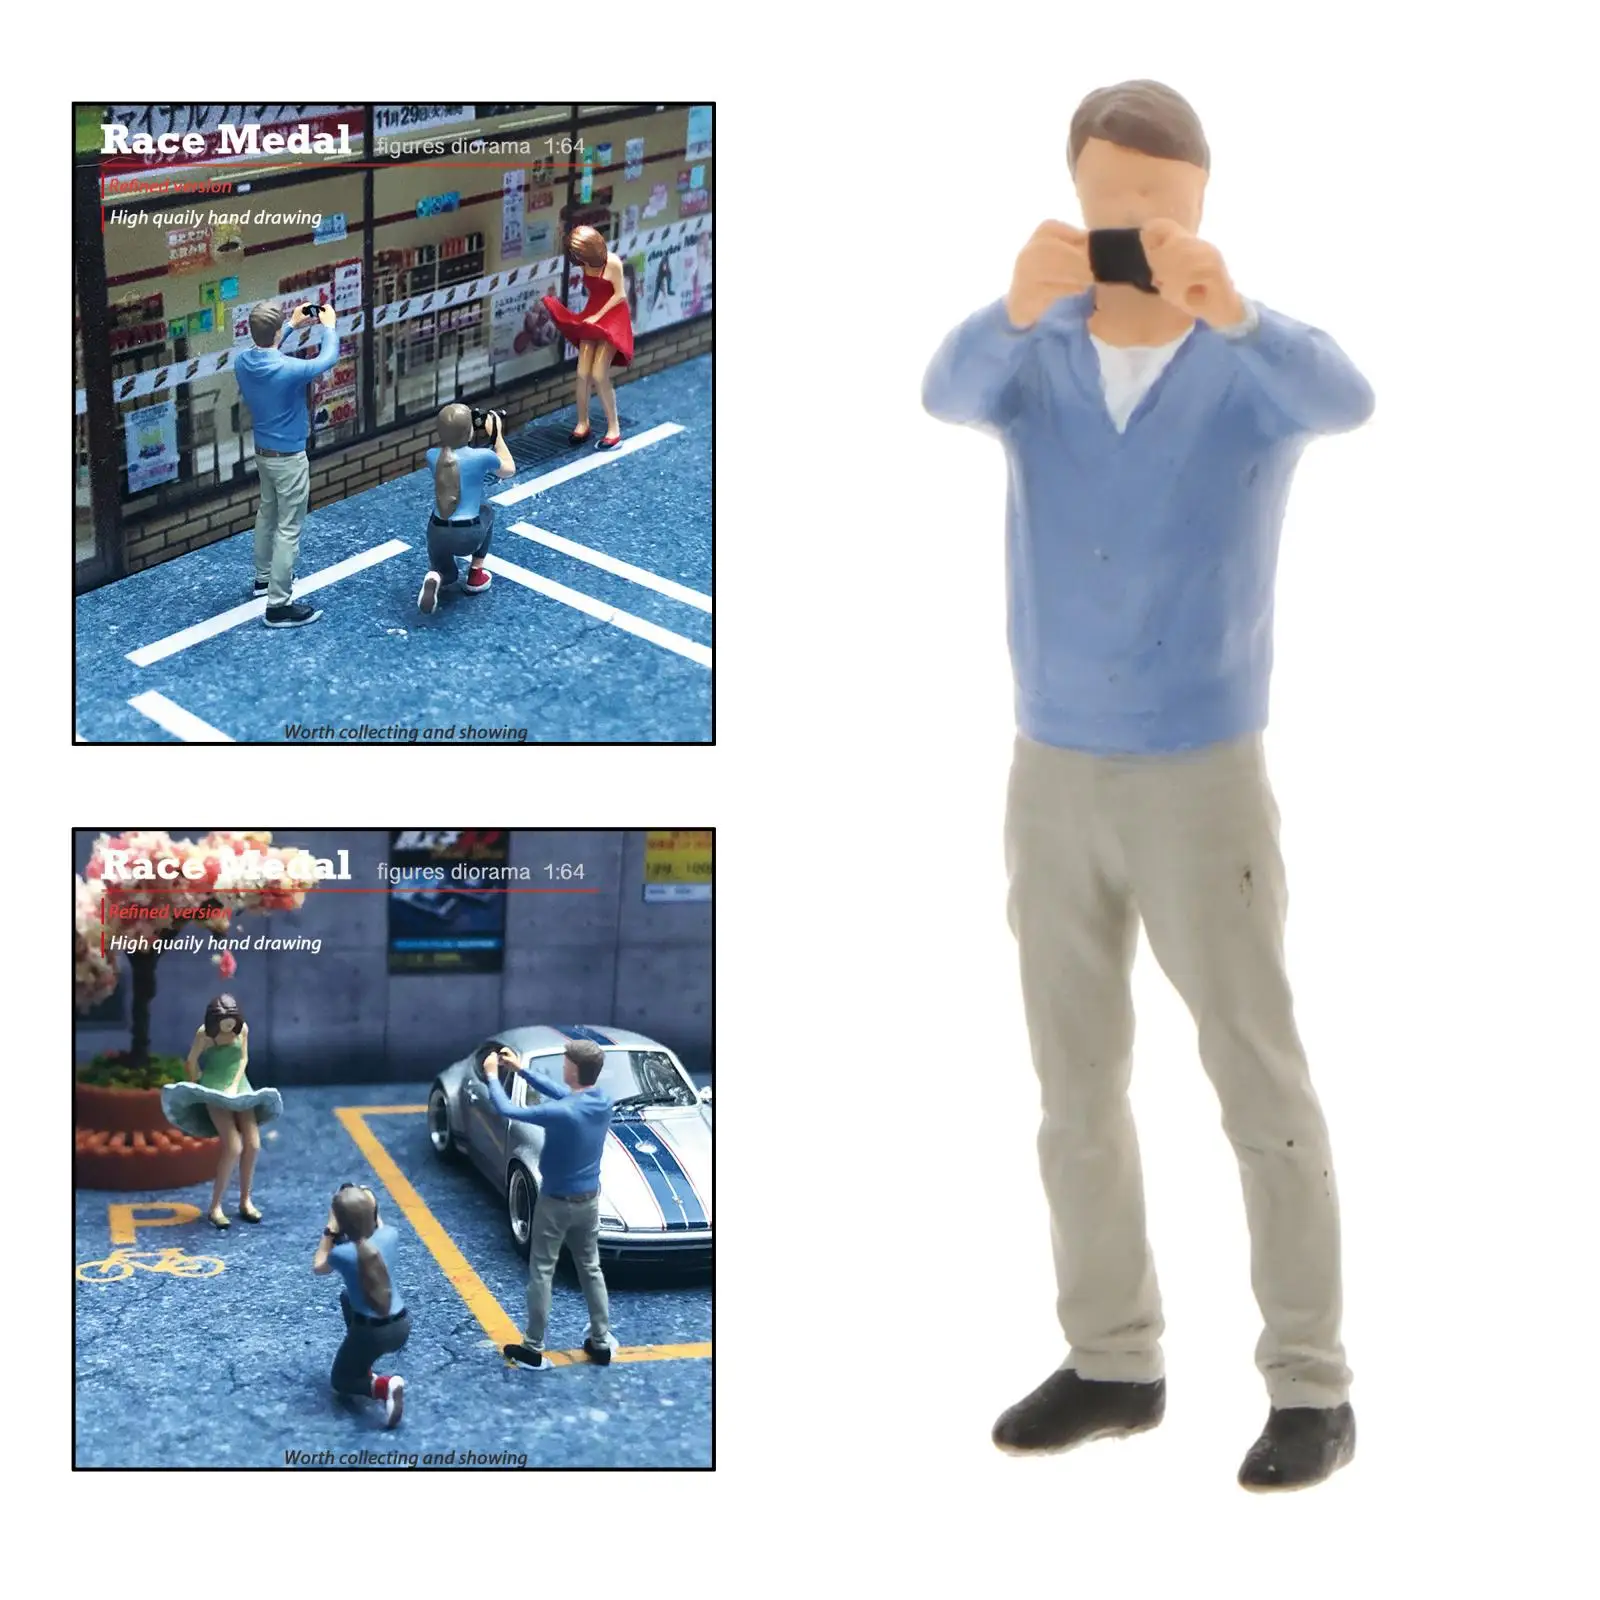 1:64 Scale Figures Diorama Men Miniature Action Figure Model for Display Toy Playset